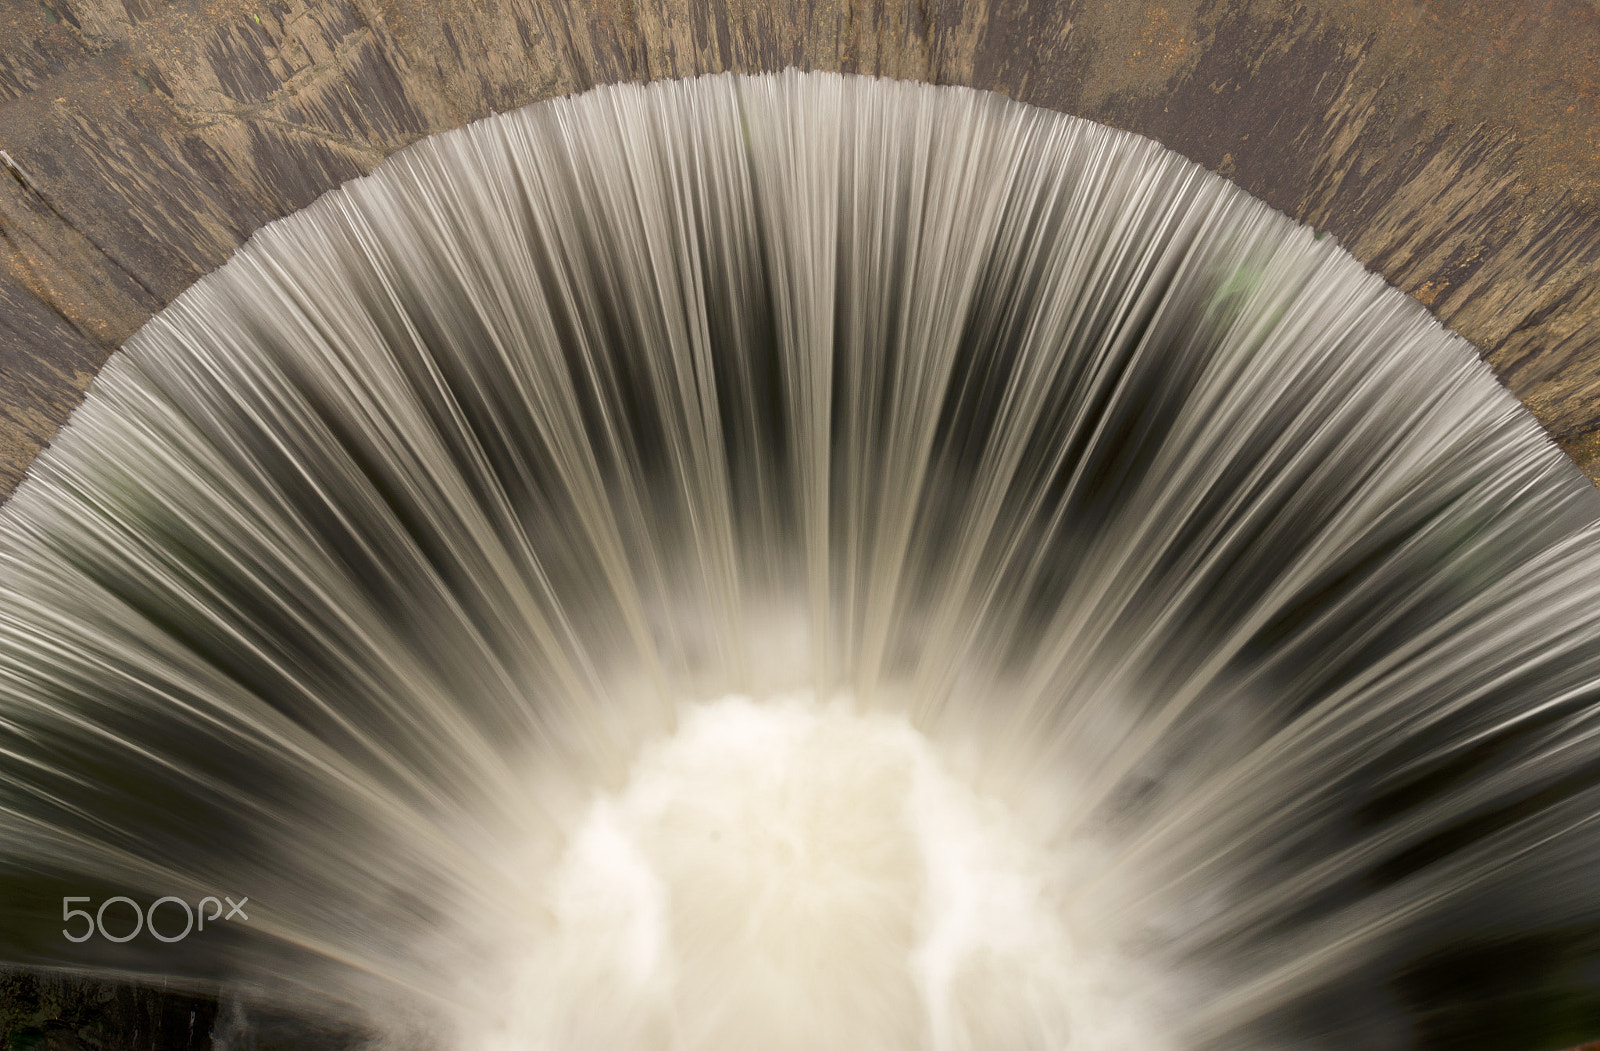 Nikon D7000 sample photo. Semi circle weir on the river with nice foam photography